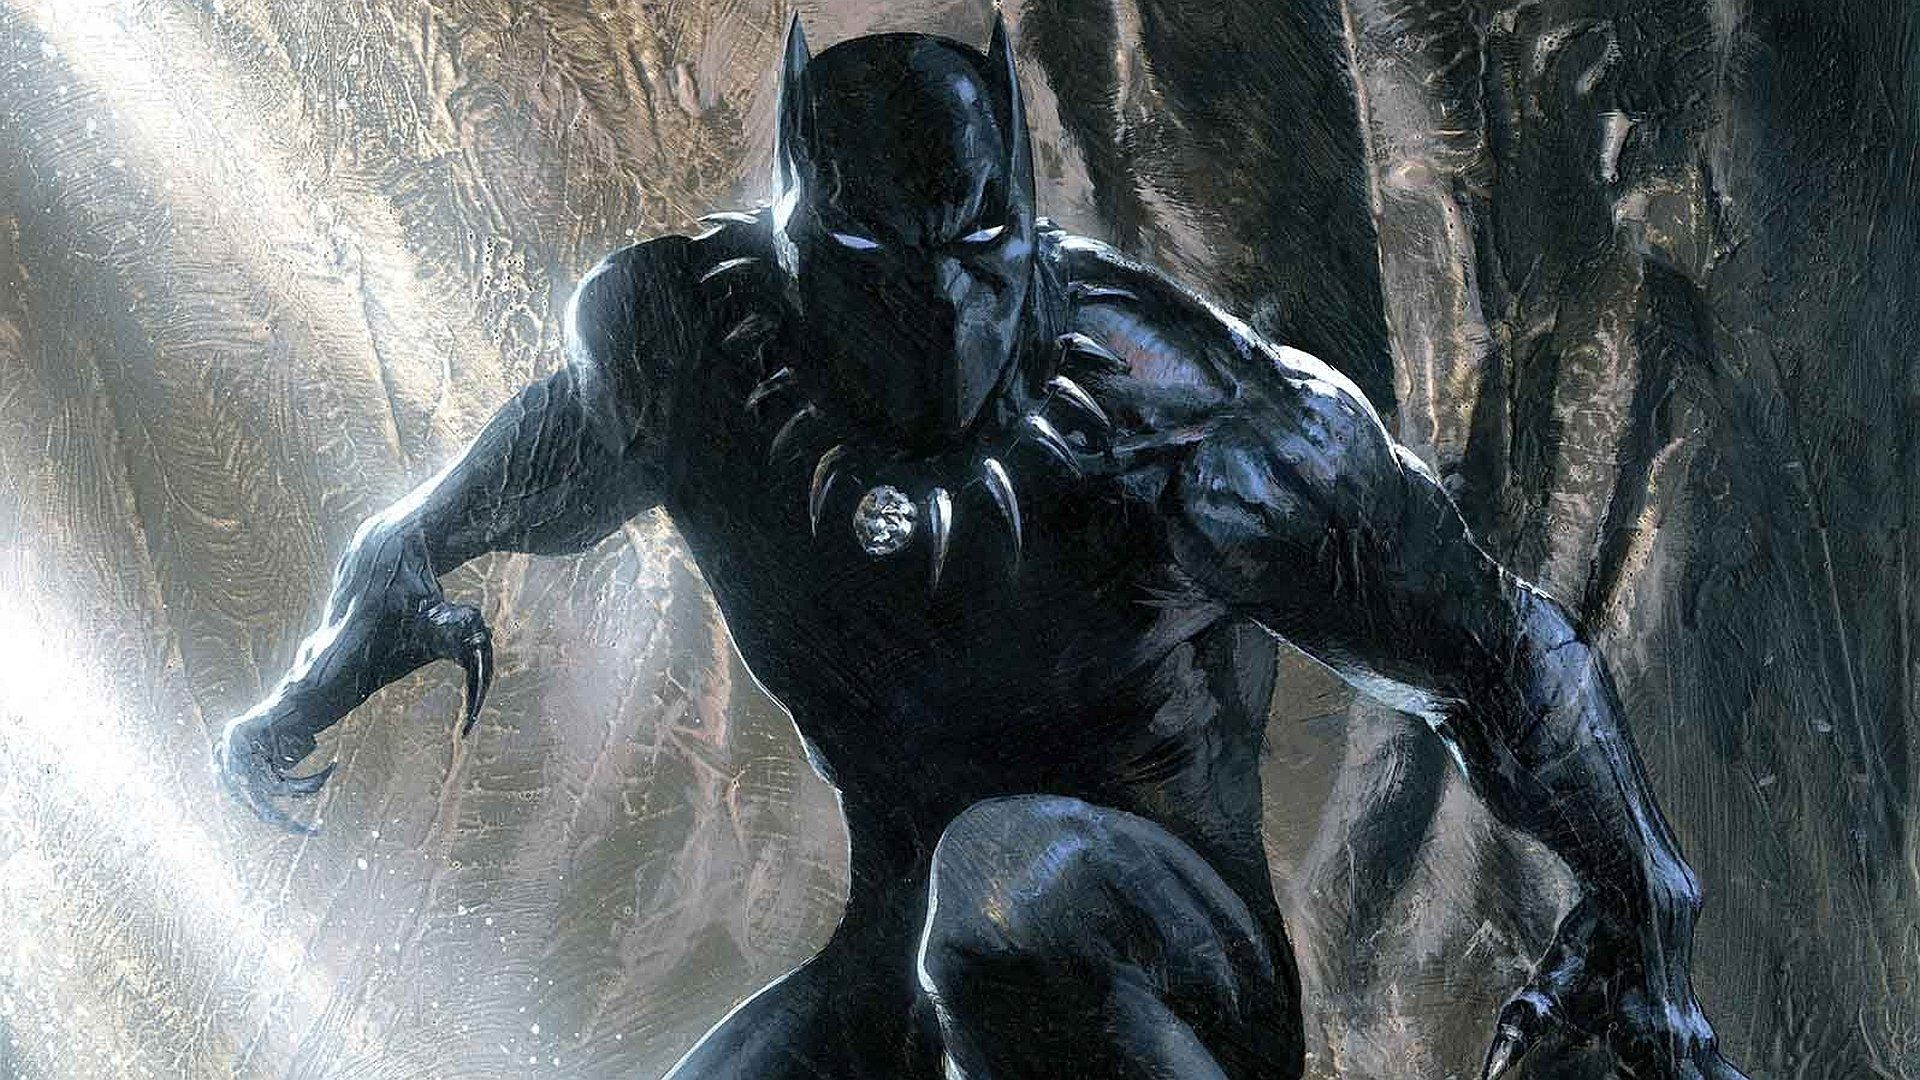 Black Panther Marvel Ics HD Wallpaper Android